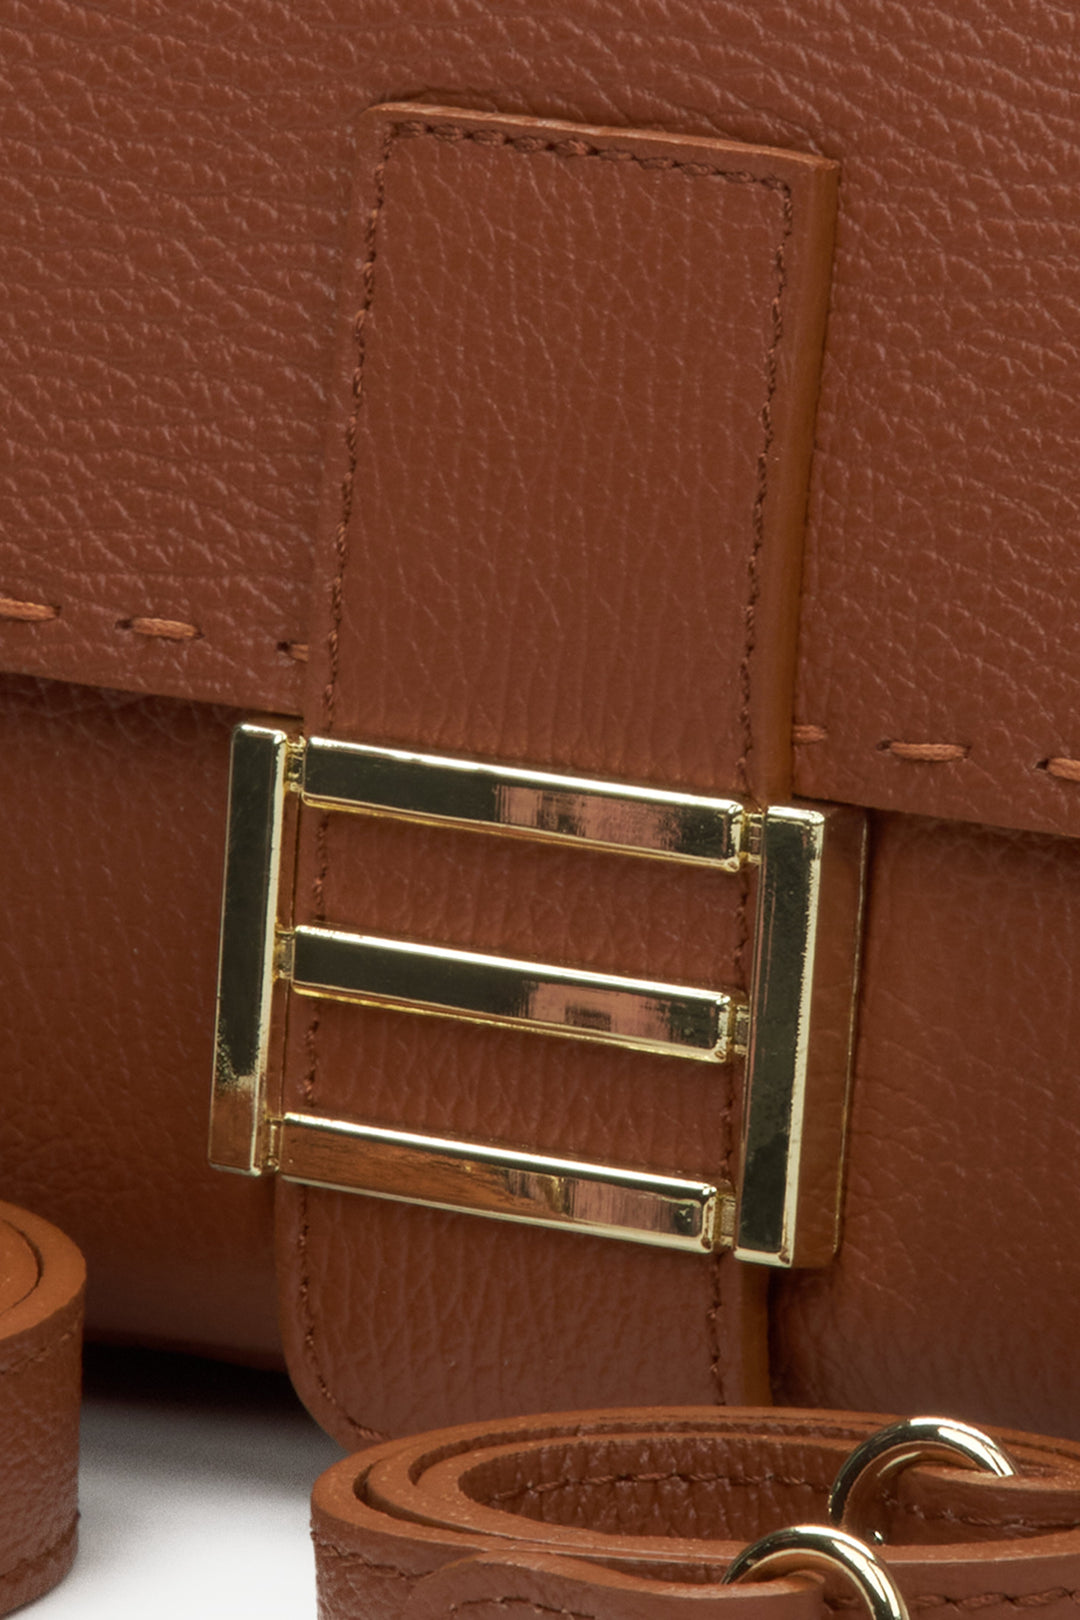 Women's handbag made of Italian genuine brown leather with golden hardware - close-up on detail.